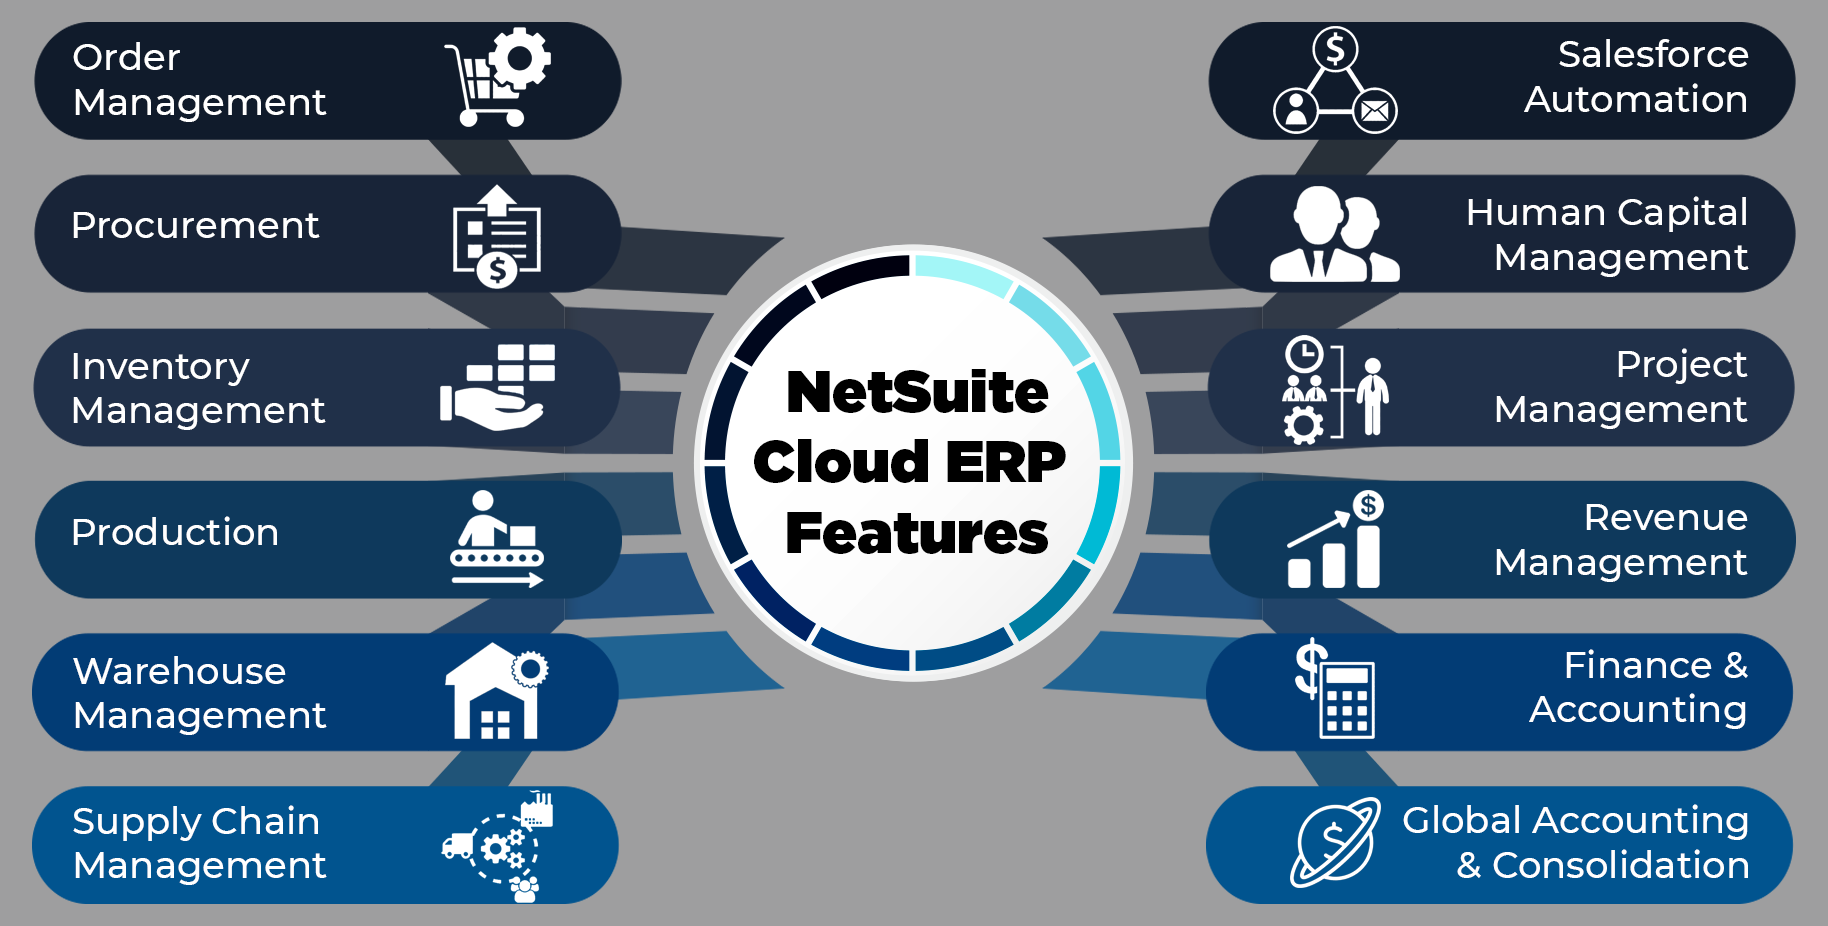 Features of Oracle NetSuite Cloud ERP